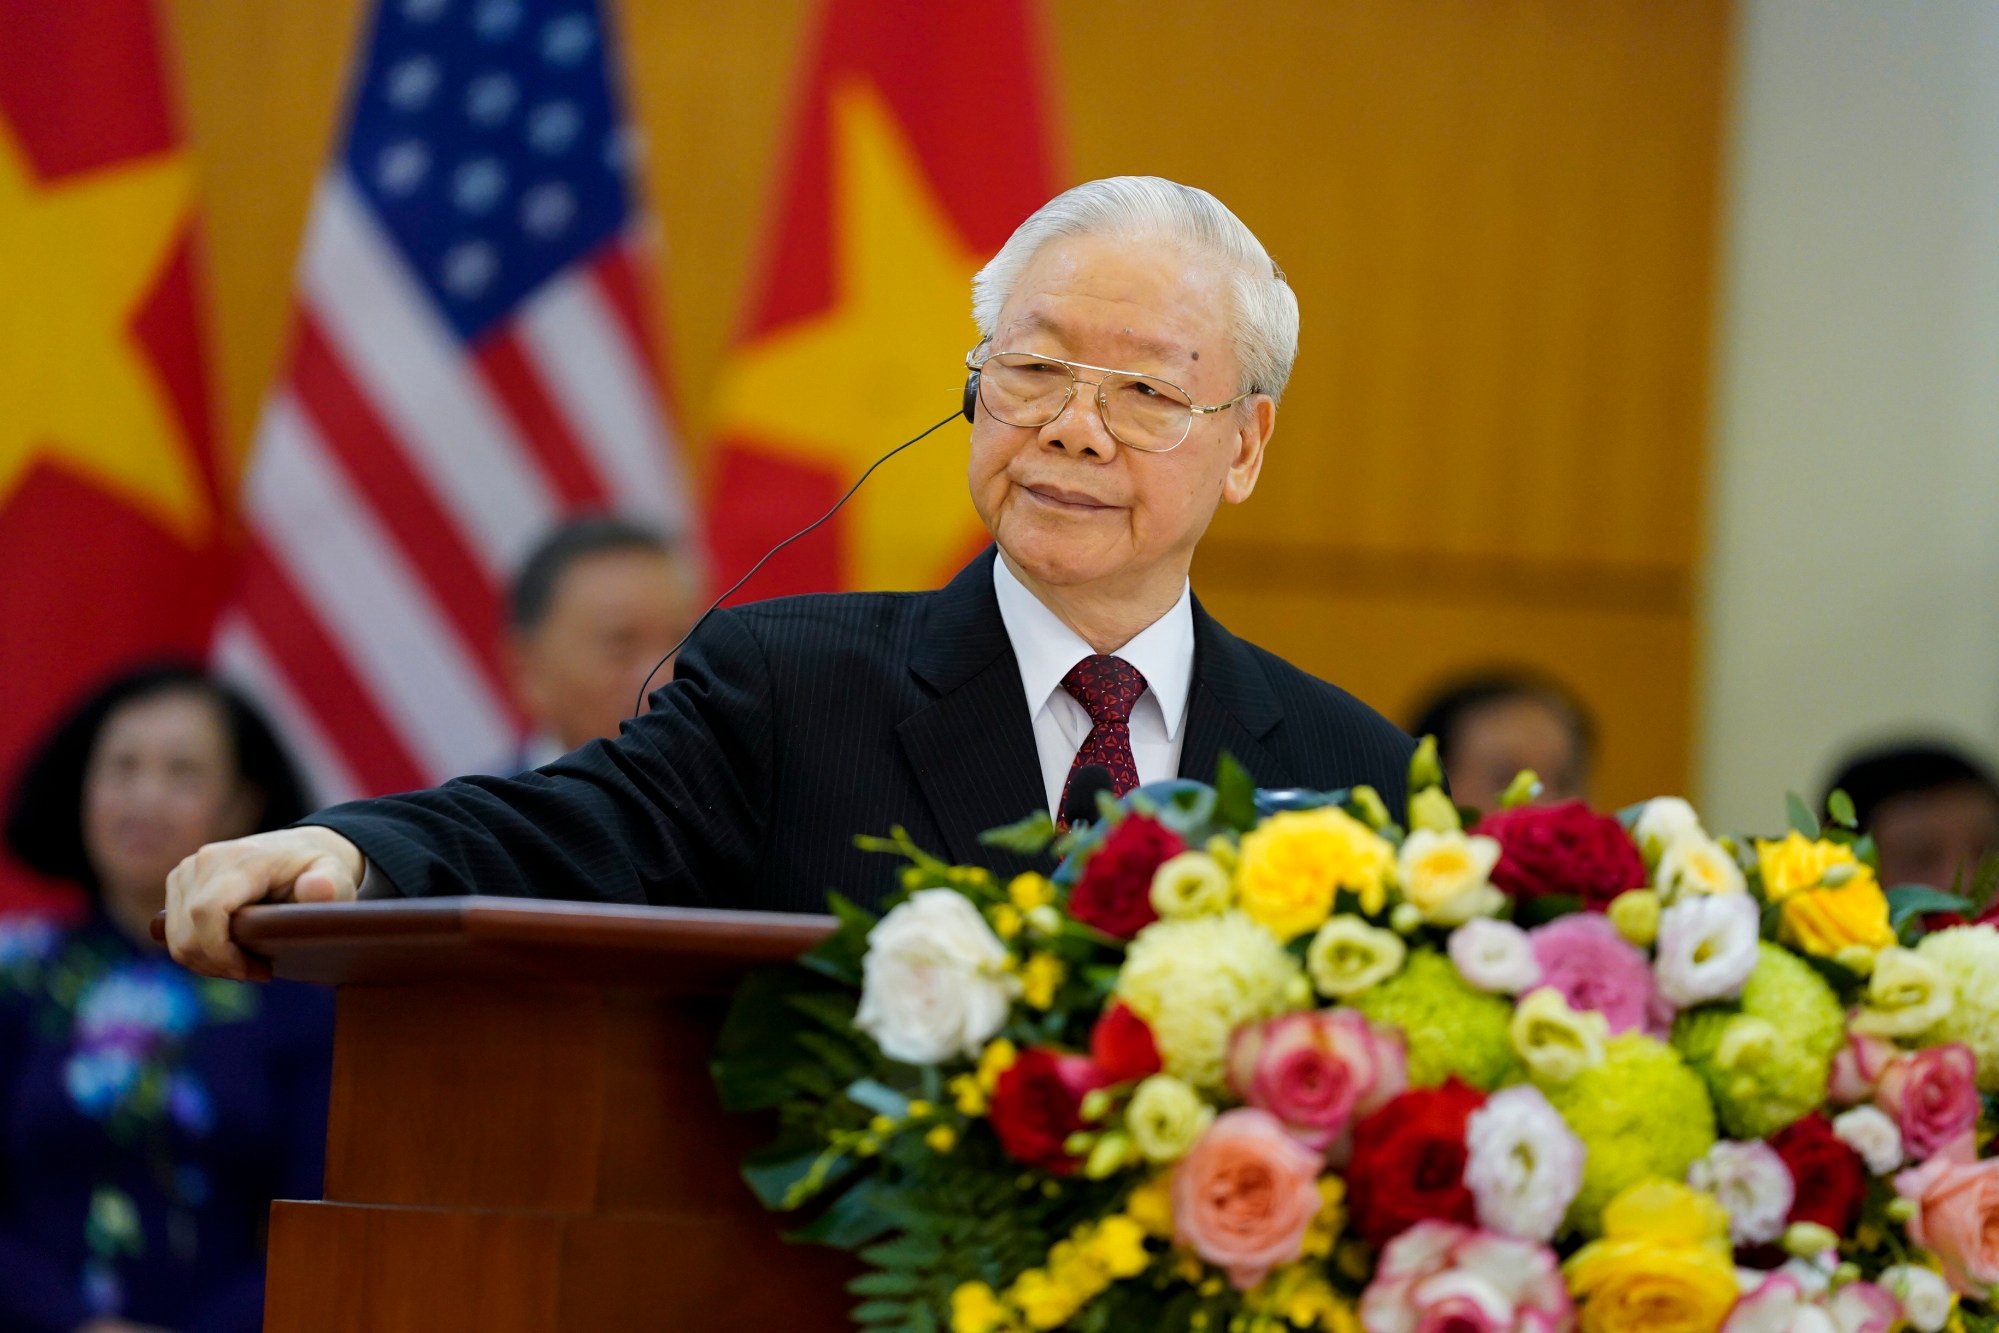 Vietnam’s General Secretary Nguyen Phu Trong is set to hand over power in the coming years. Photo: AP